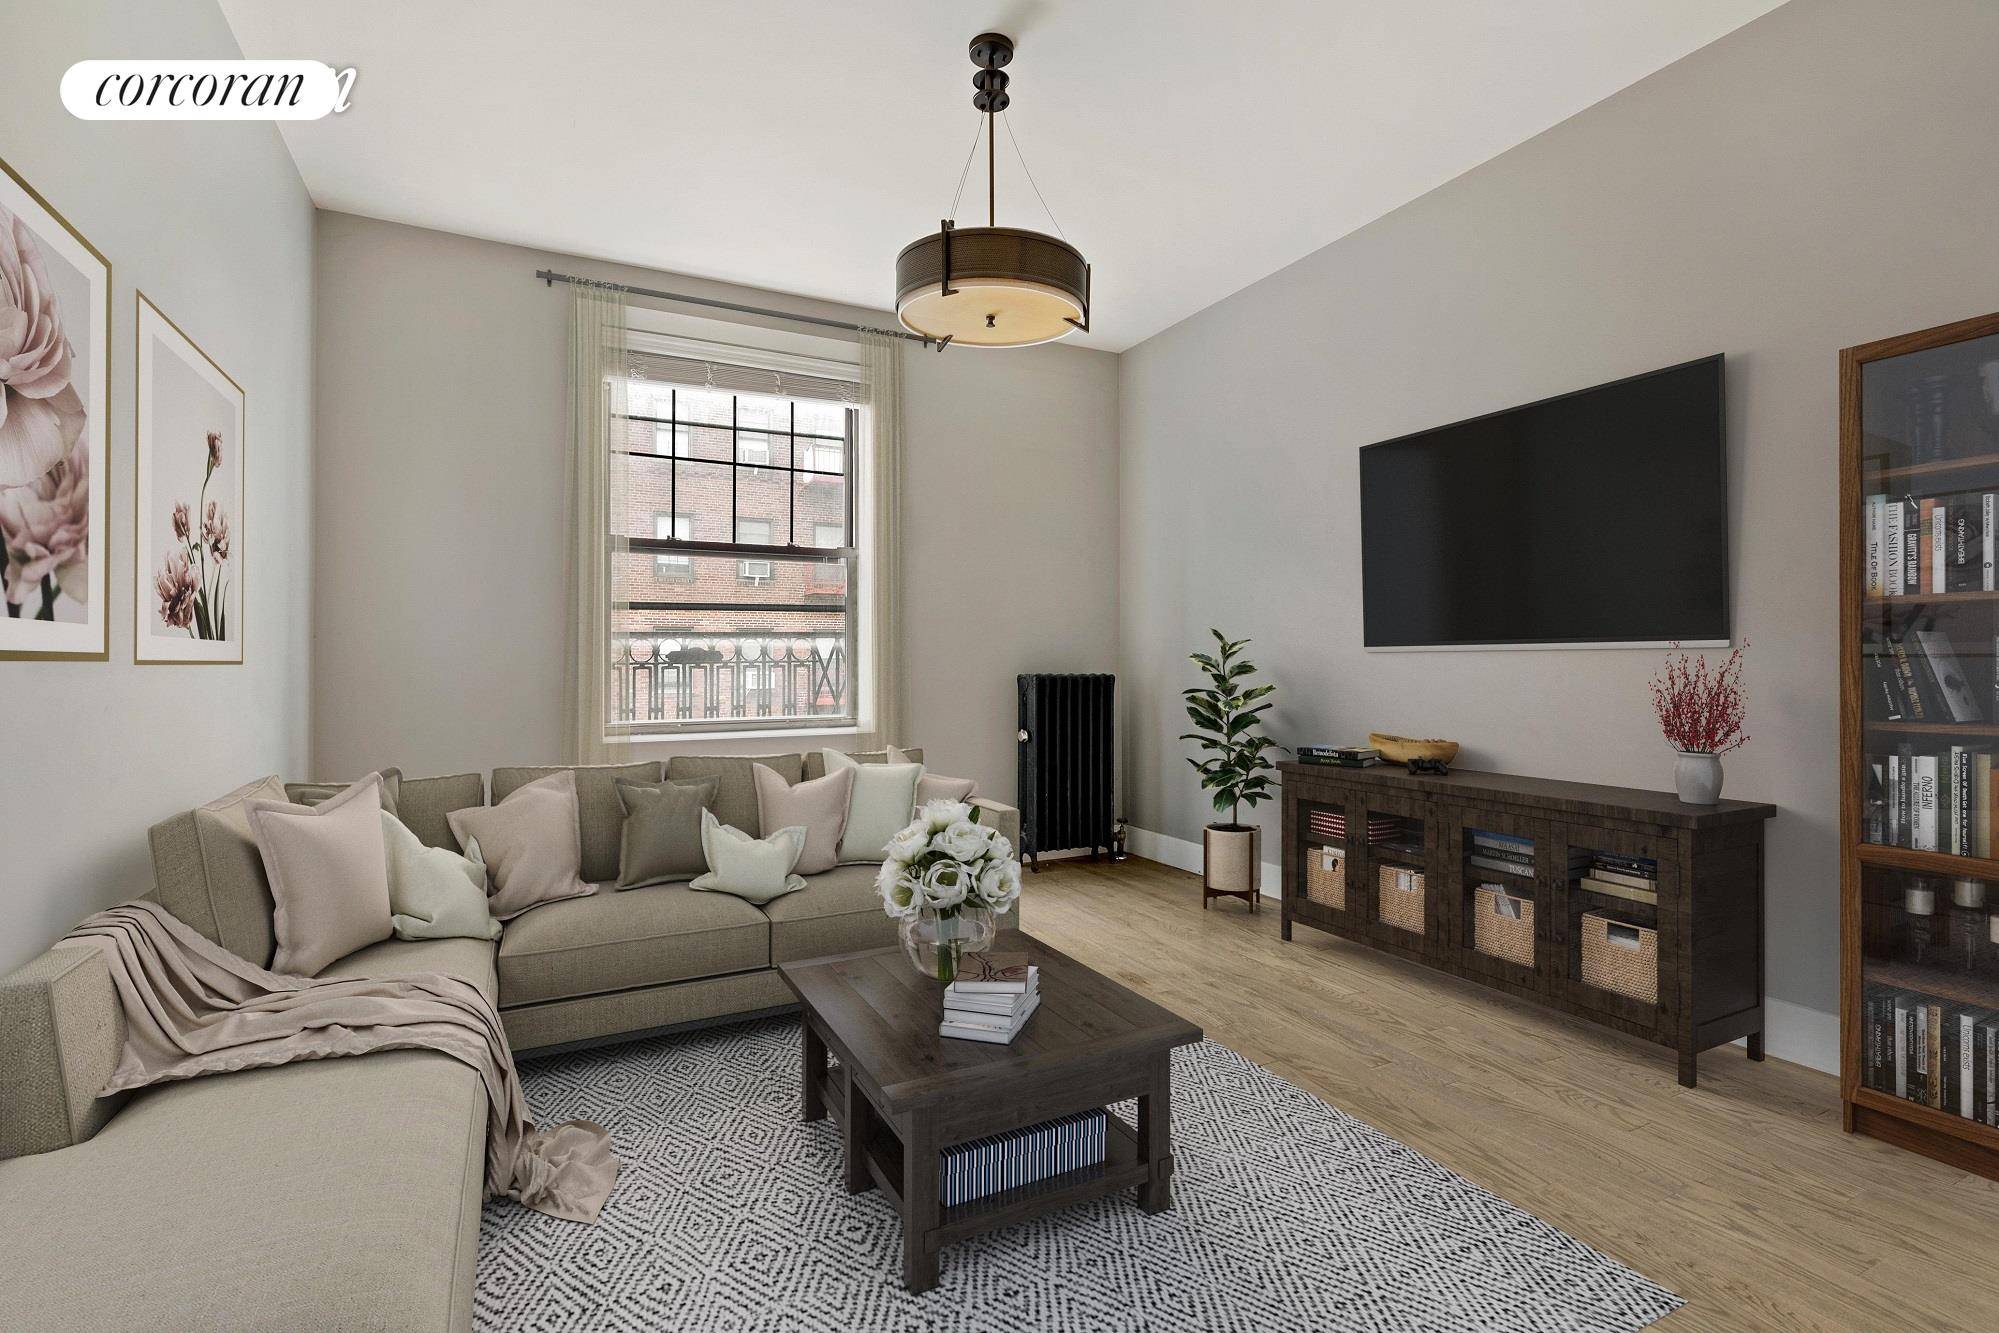 Welcome to a beautiful two bedroom apartment located on the top floor of a historic Prospect Lefferts Gardens condo building.